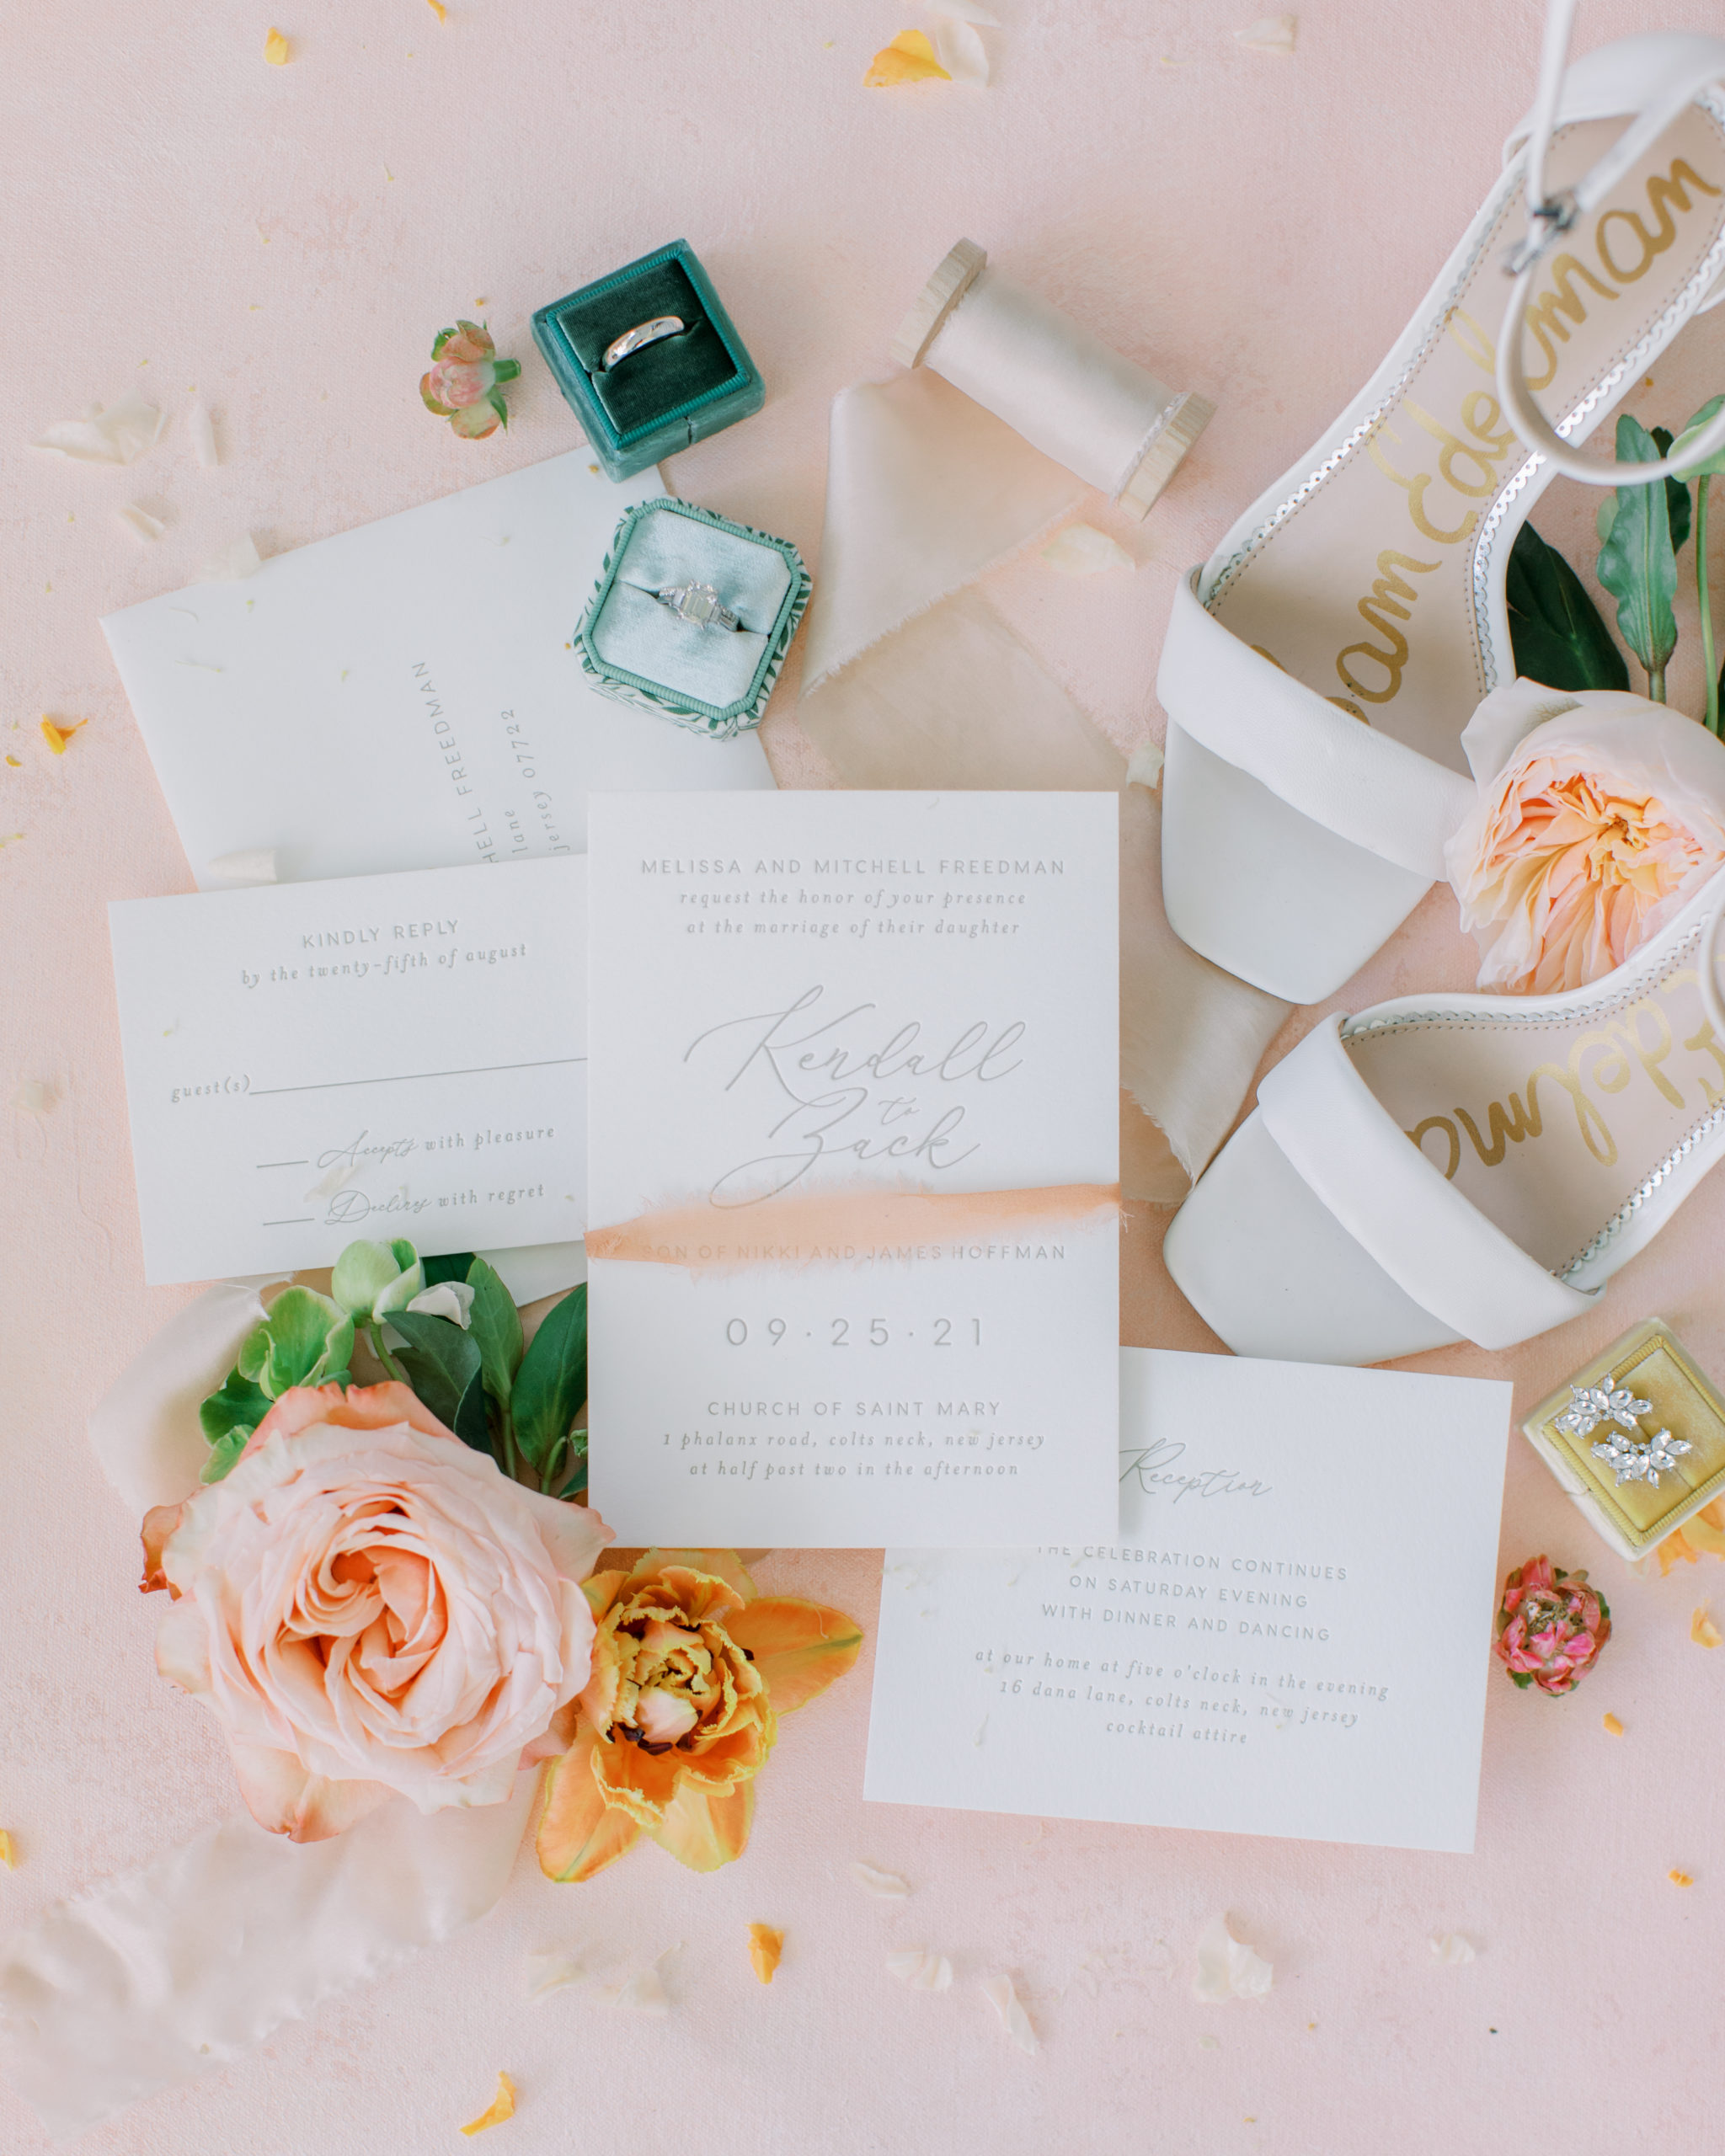 wedding invitation suite with shoes pink roses and flower petals NJ Private Estate Wedding Photography